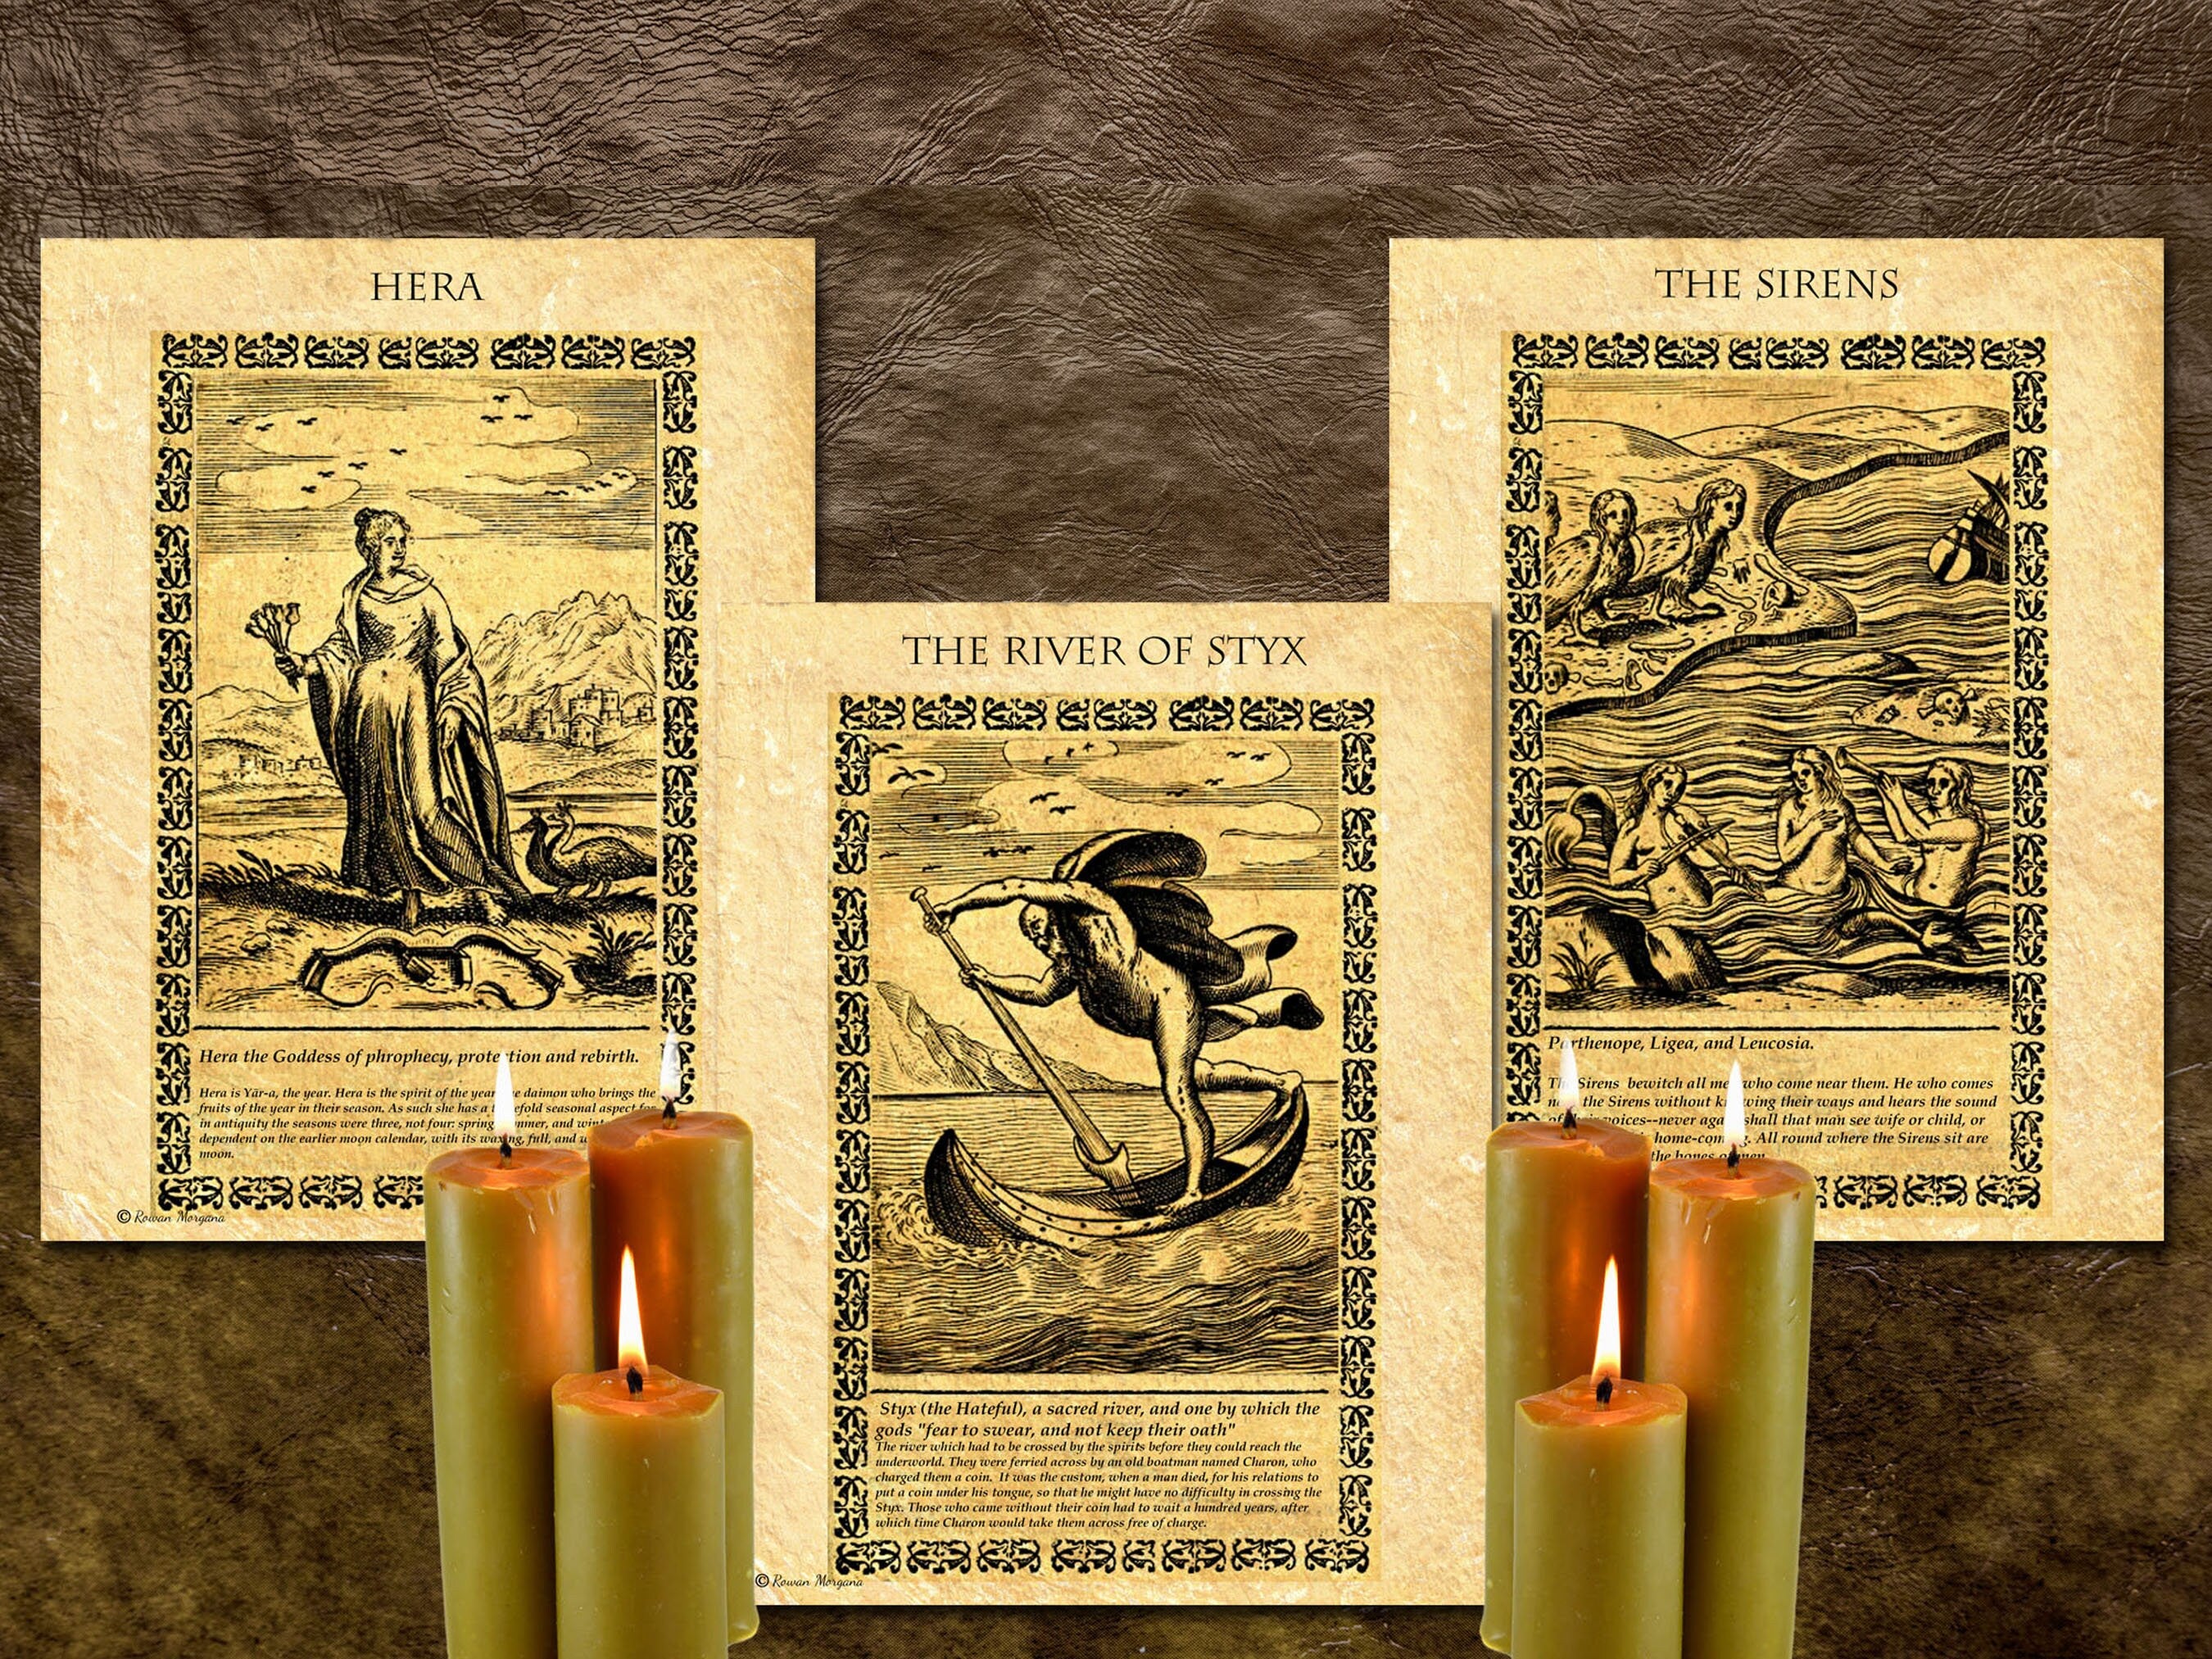 Hera, The River of Styx, and The Siren, pages with images of the Gods and text describing them.